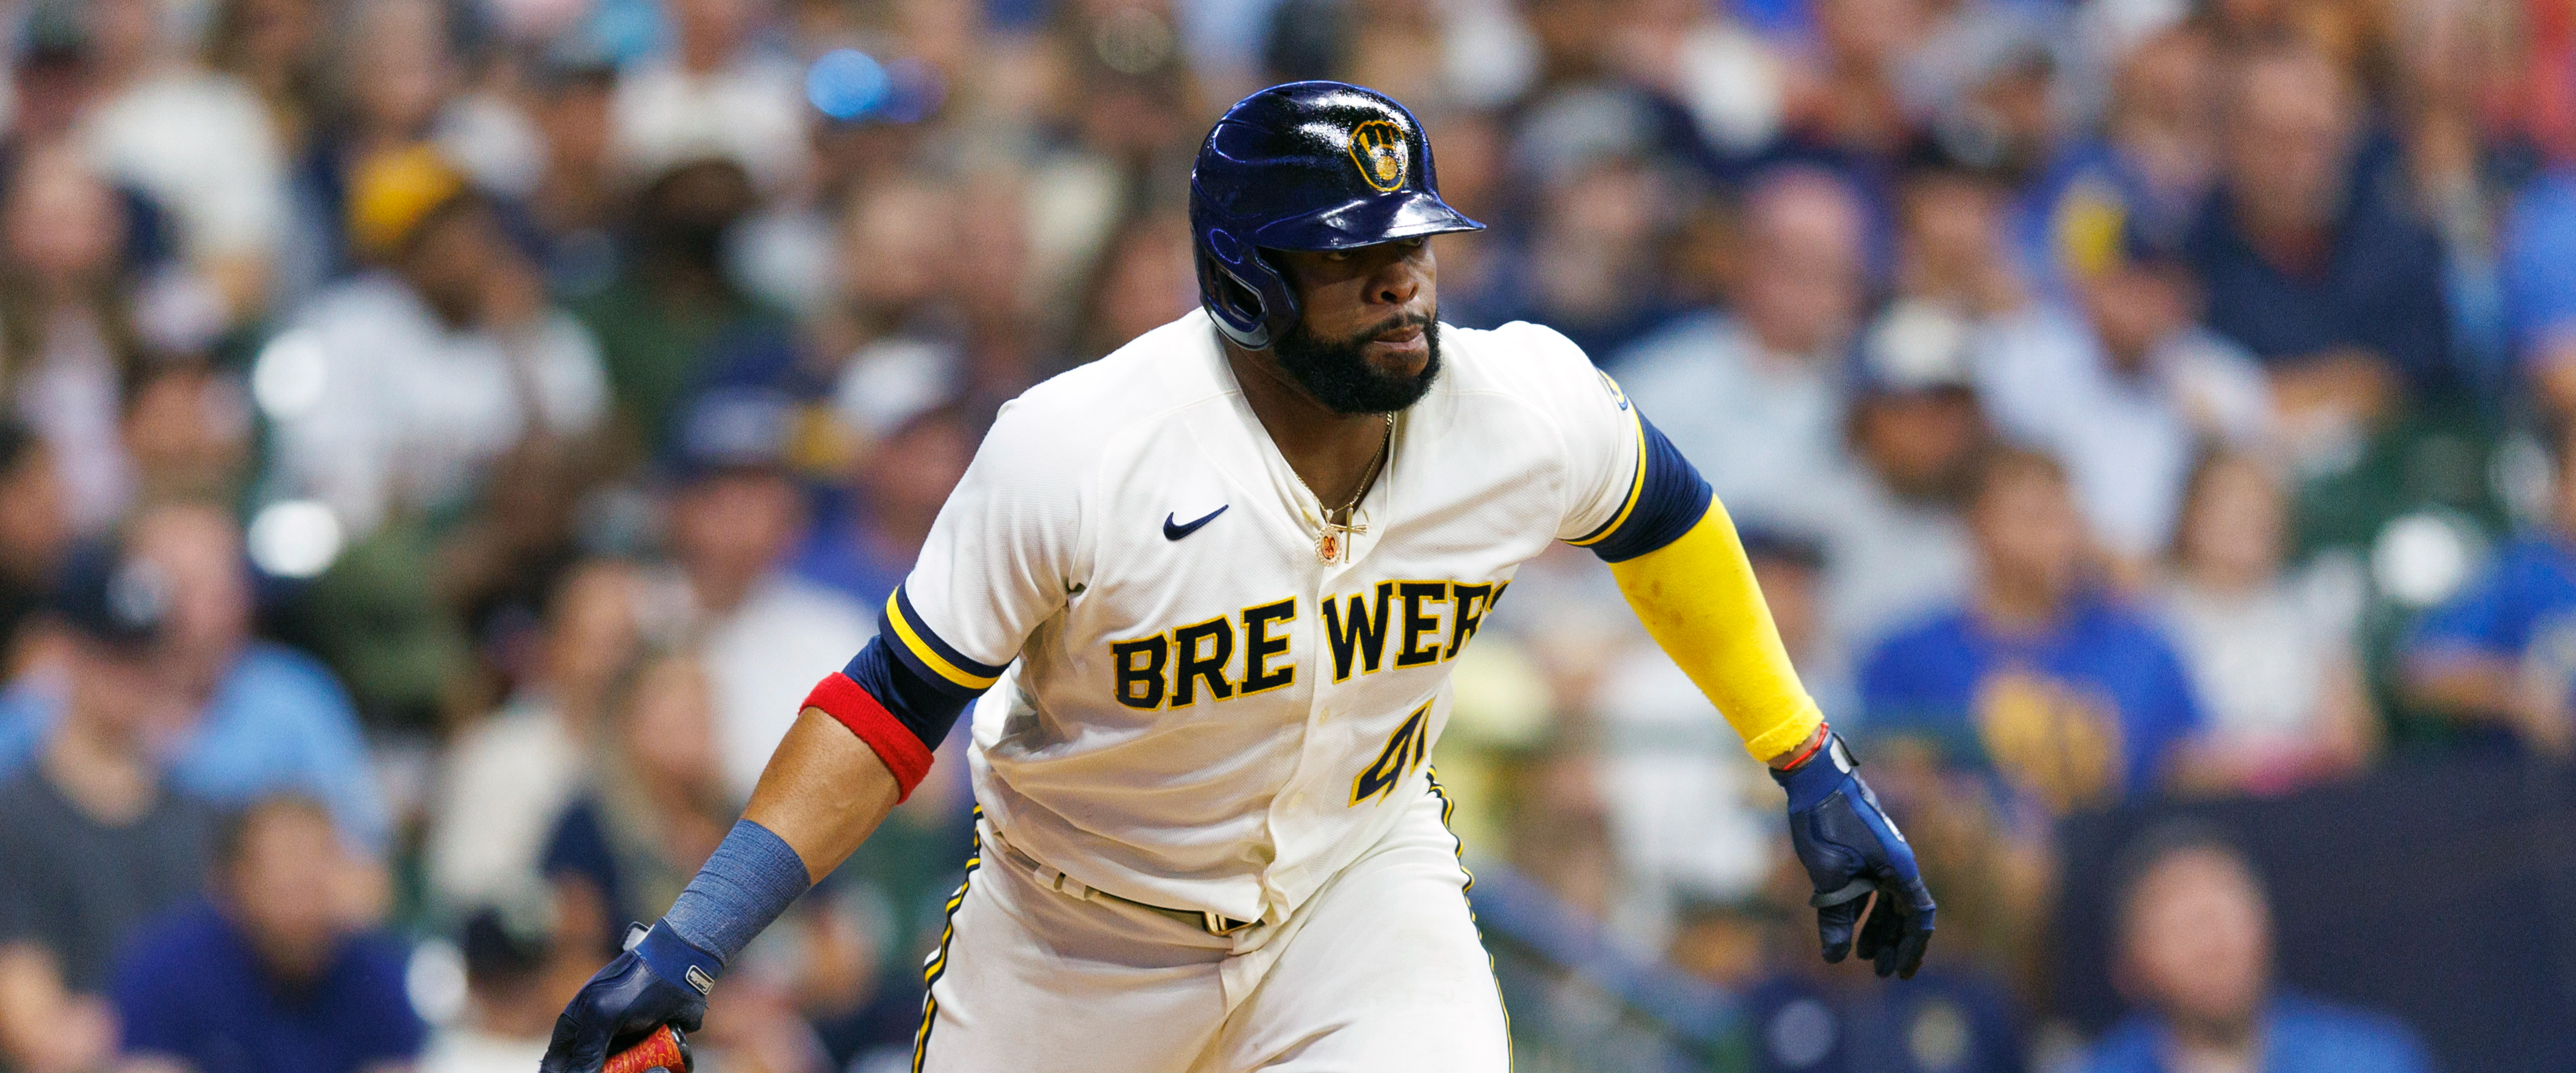 The Brewers Continue To Win With The Worse Batting Average In National League